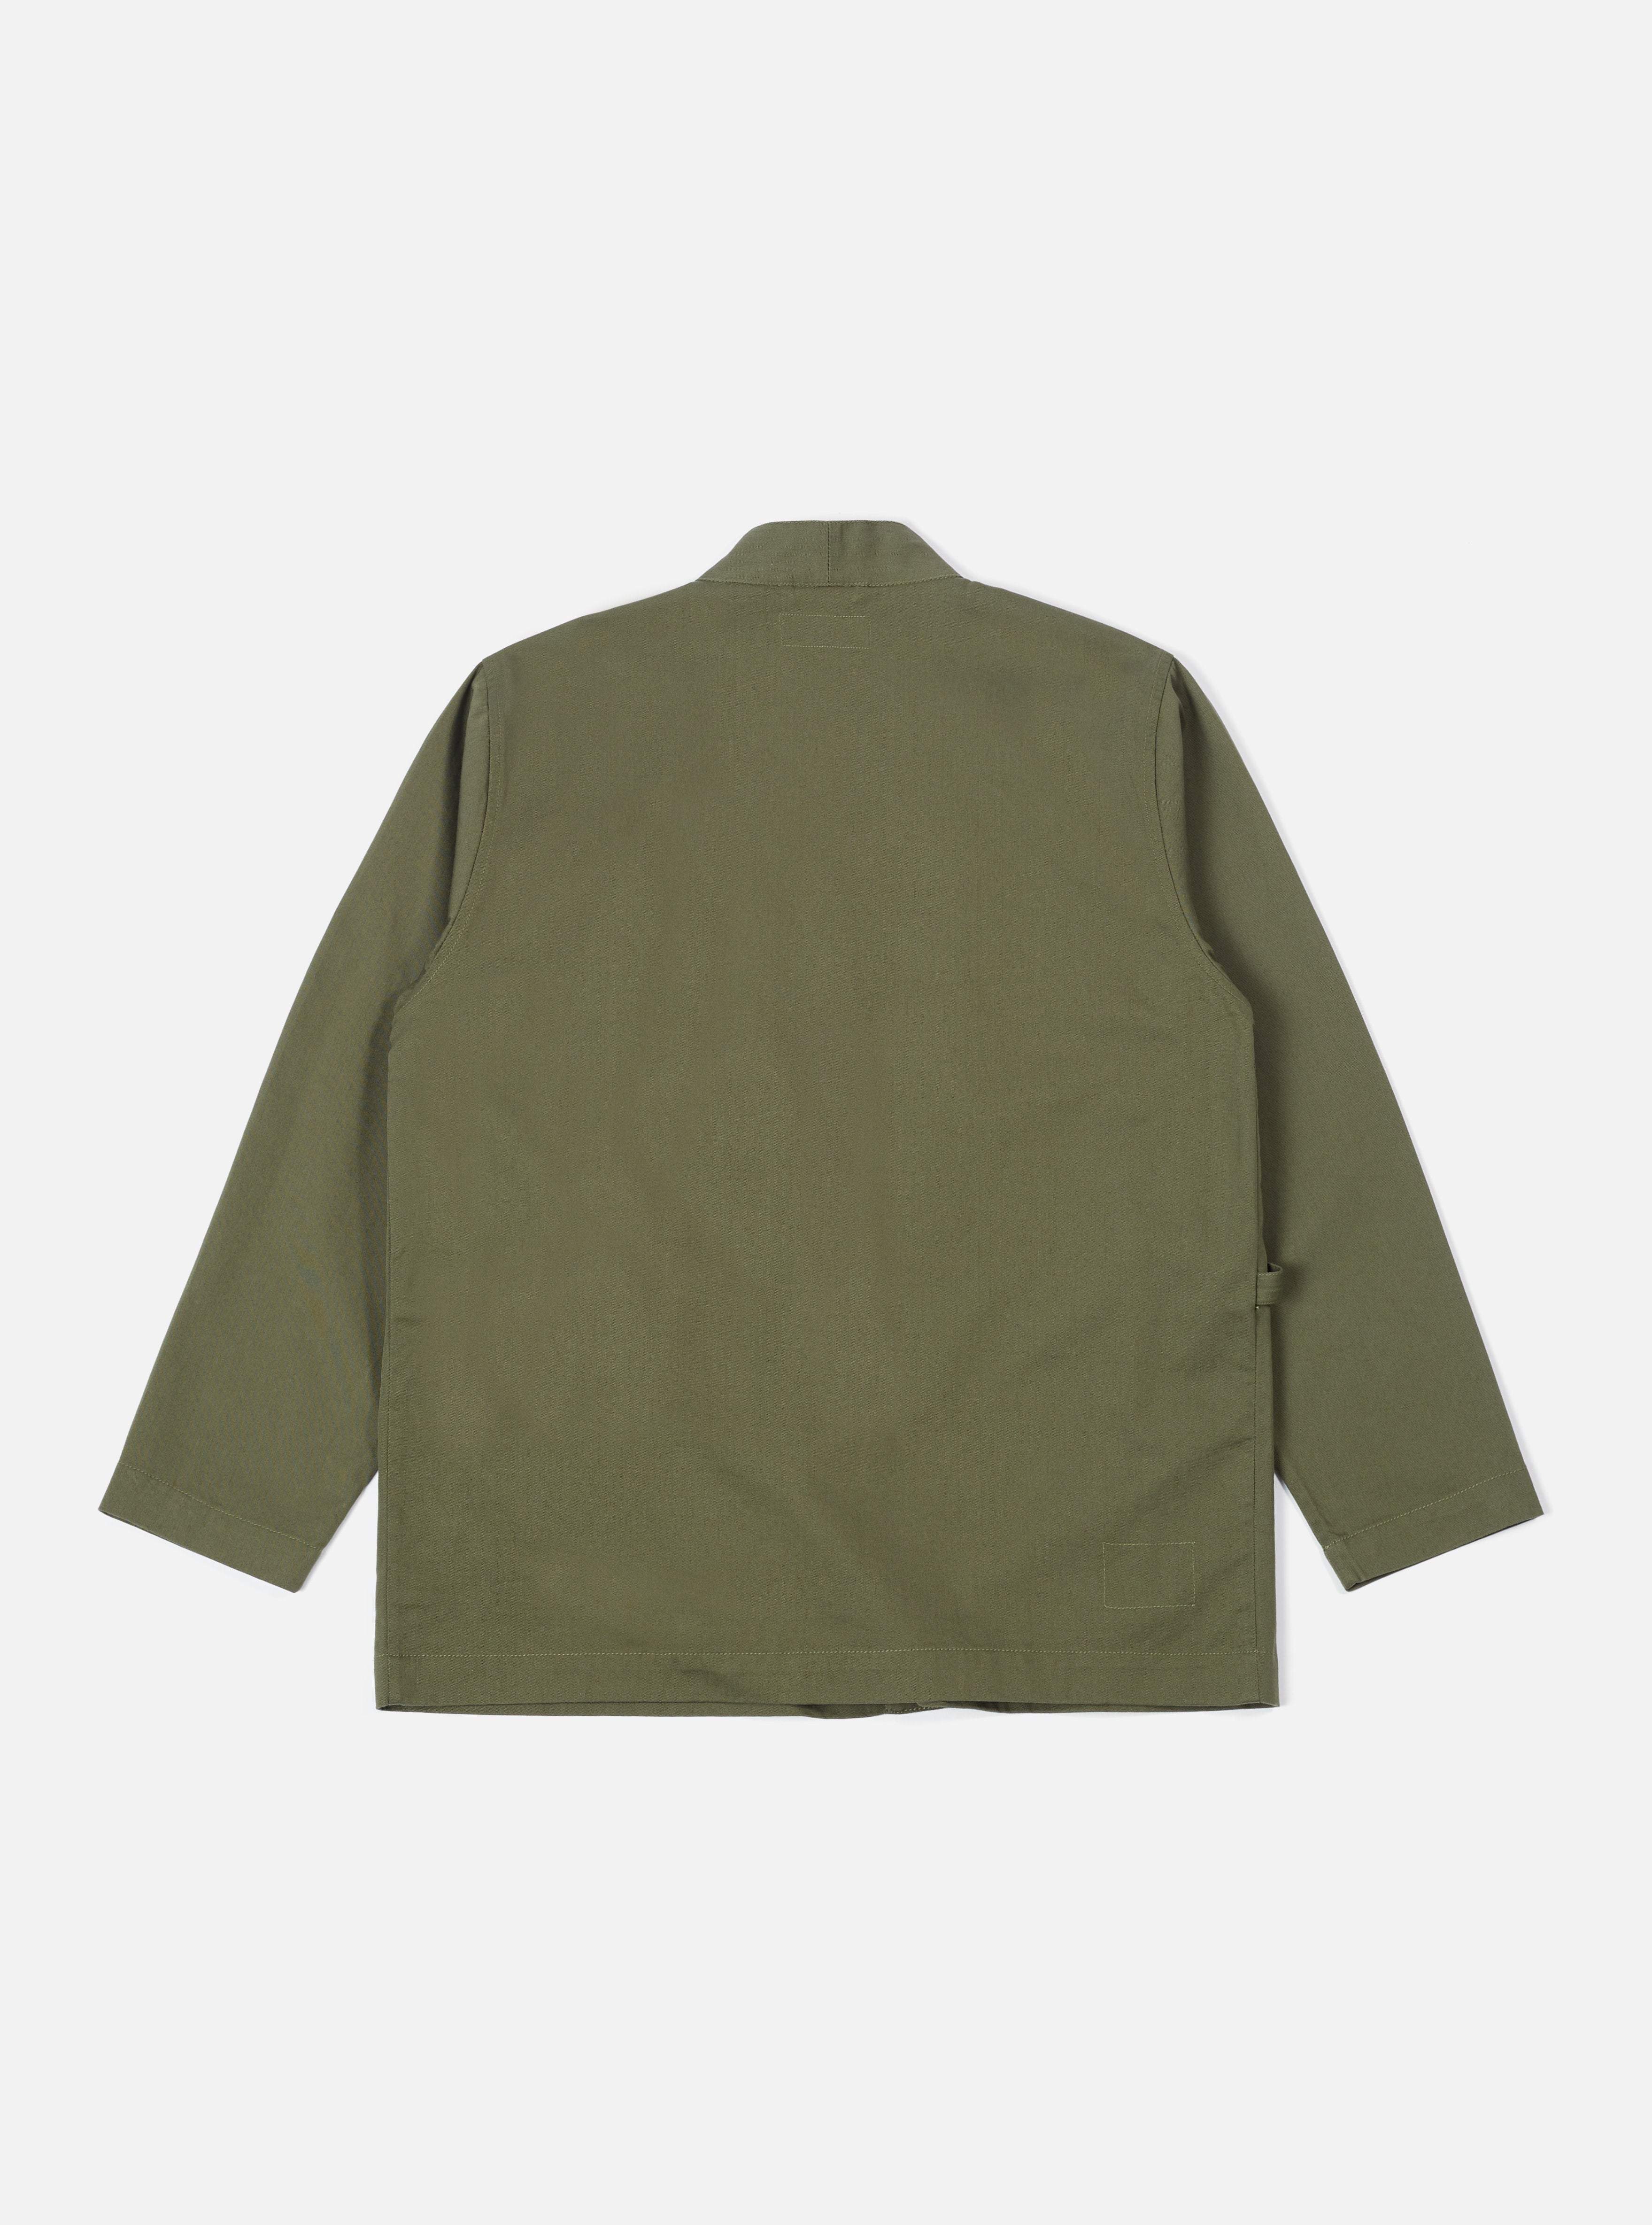 Universal Works Kyoto Work Jacket in Light Olive Twill